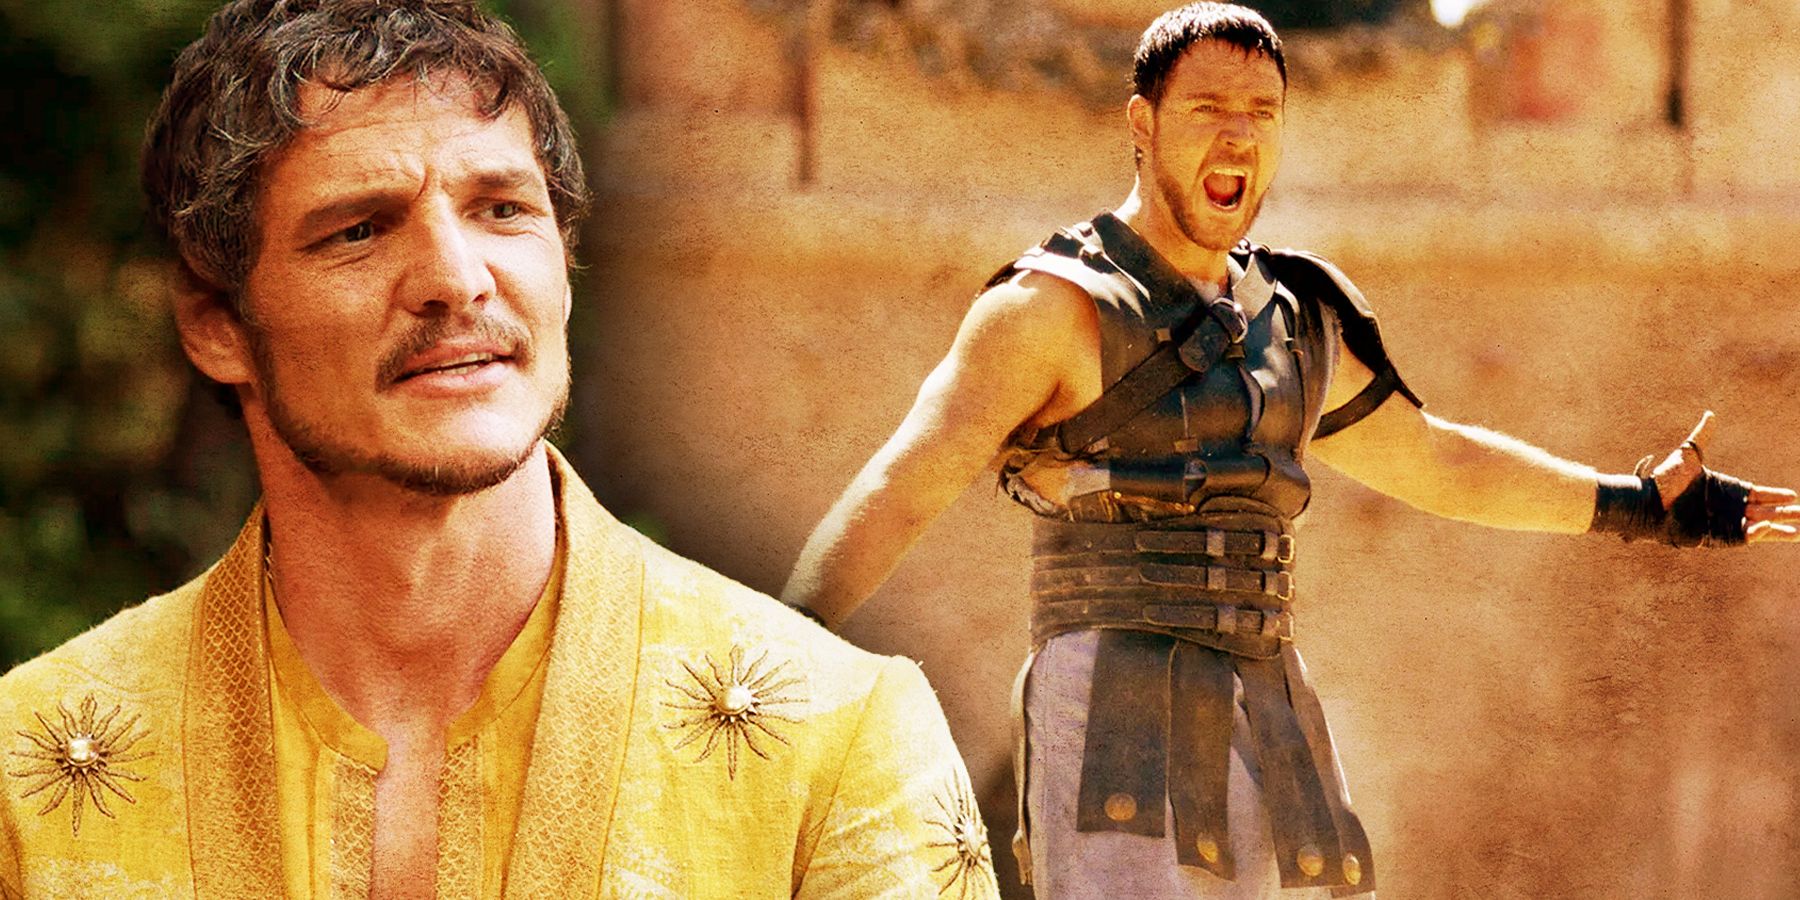 Pedro Pascal from Game of Thrones and Russel Crowe from Gladiator.